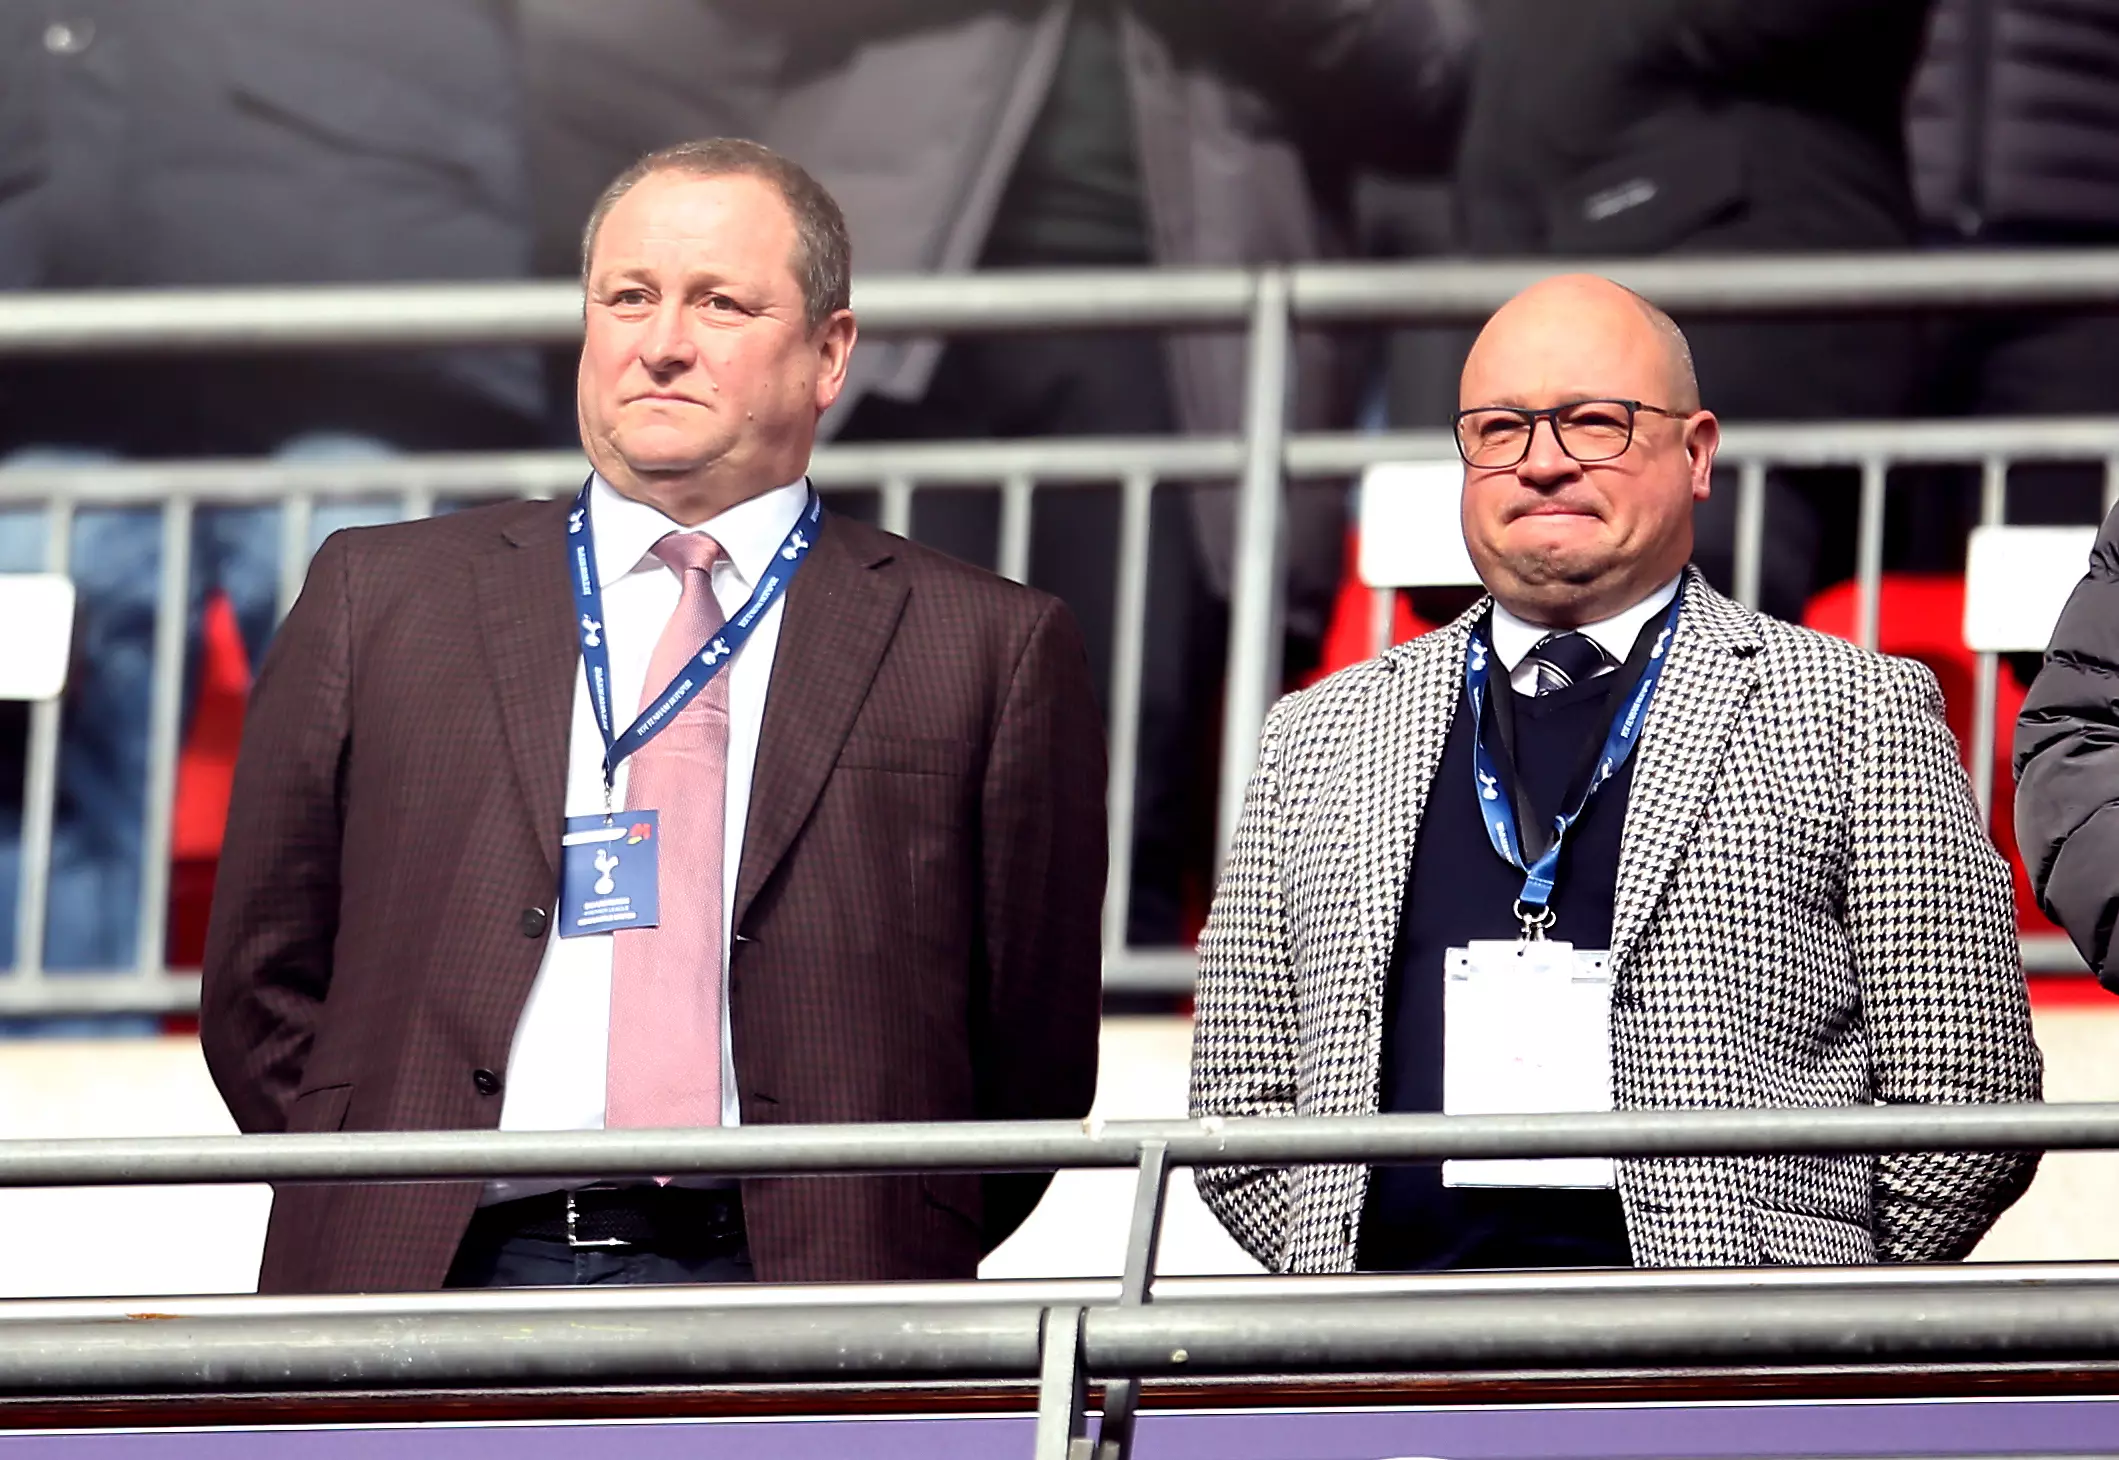 Will Mike Ashley ever sell the club? Image: PA Images